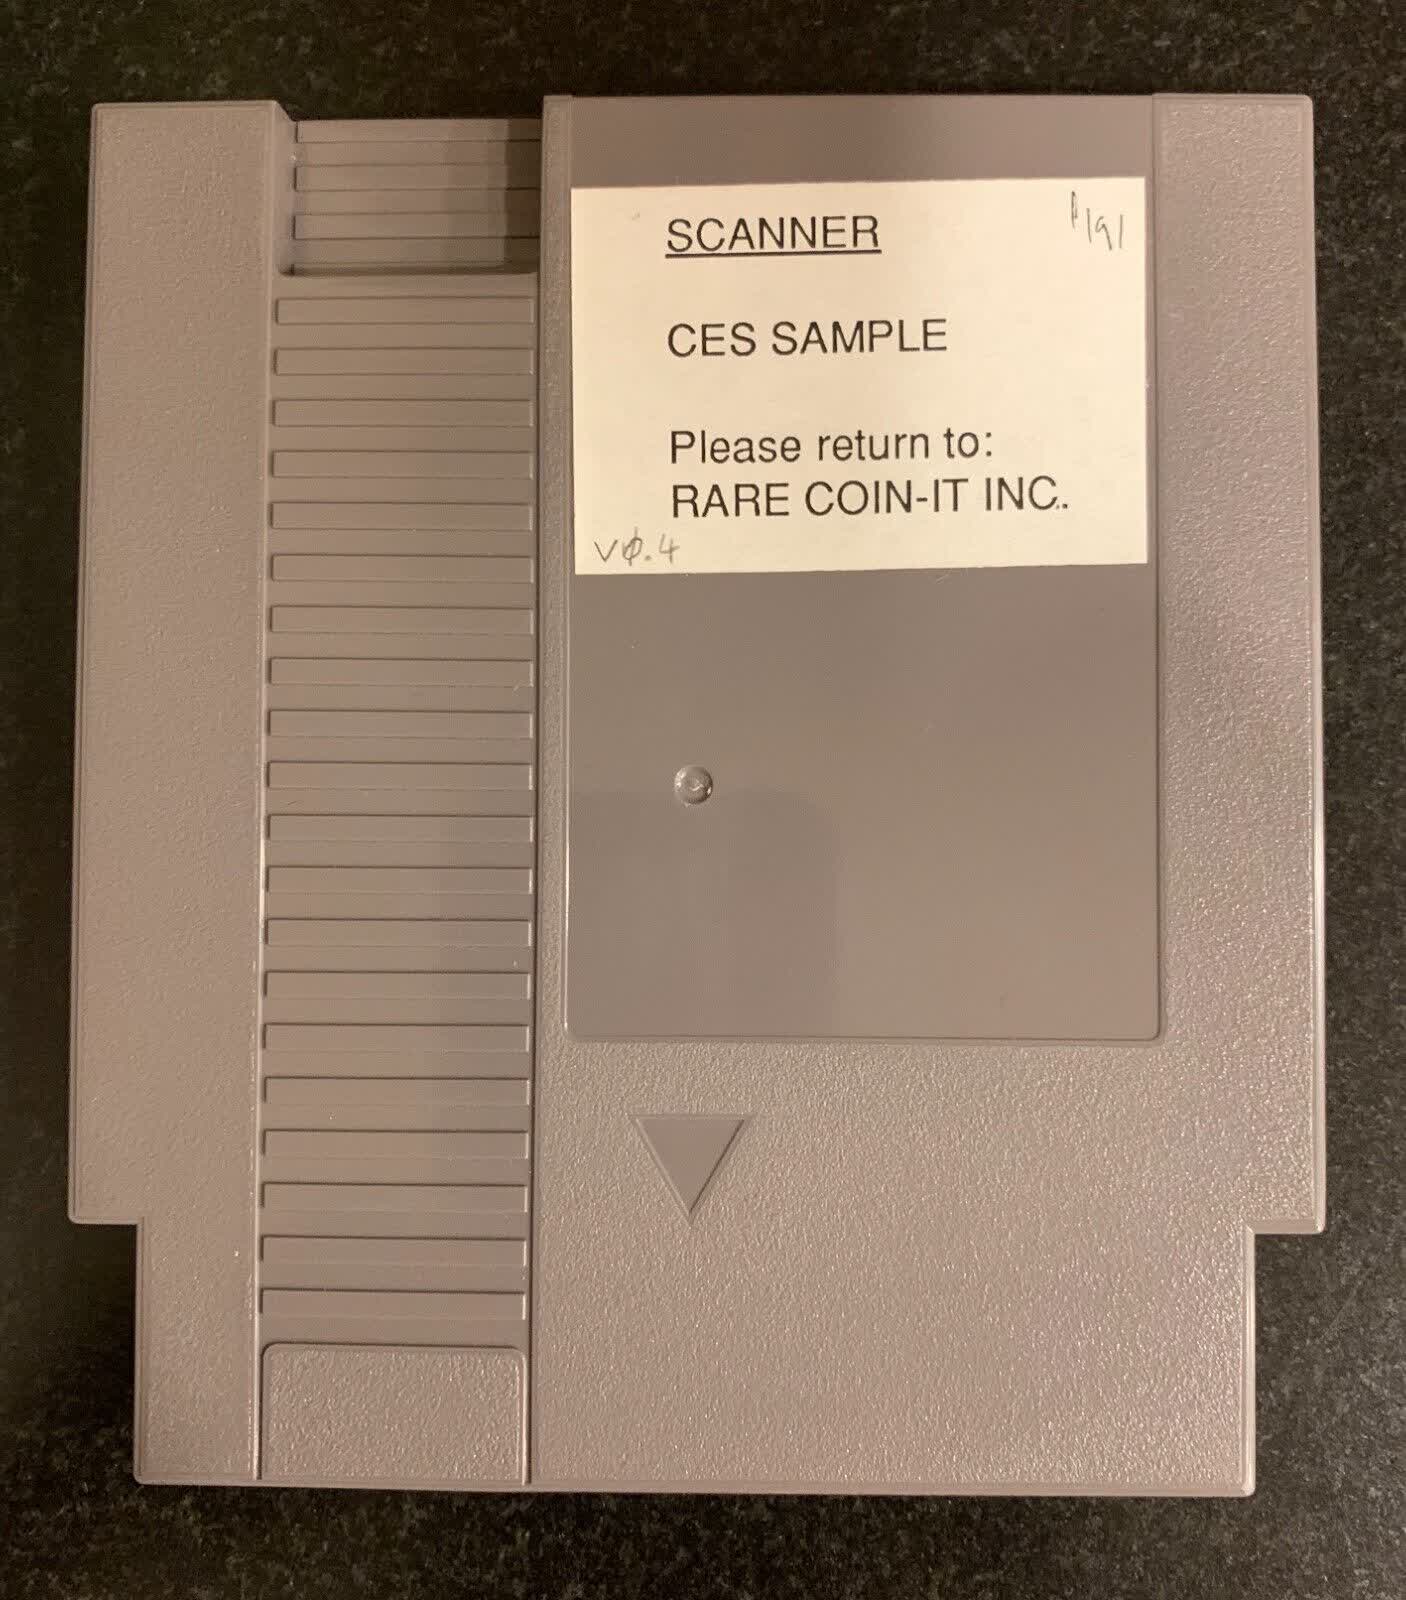 Two unreleased NES prototypes are poised to bring big bucks on eBay